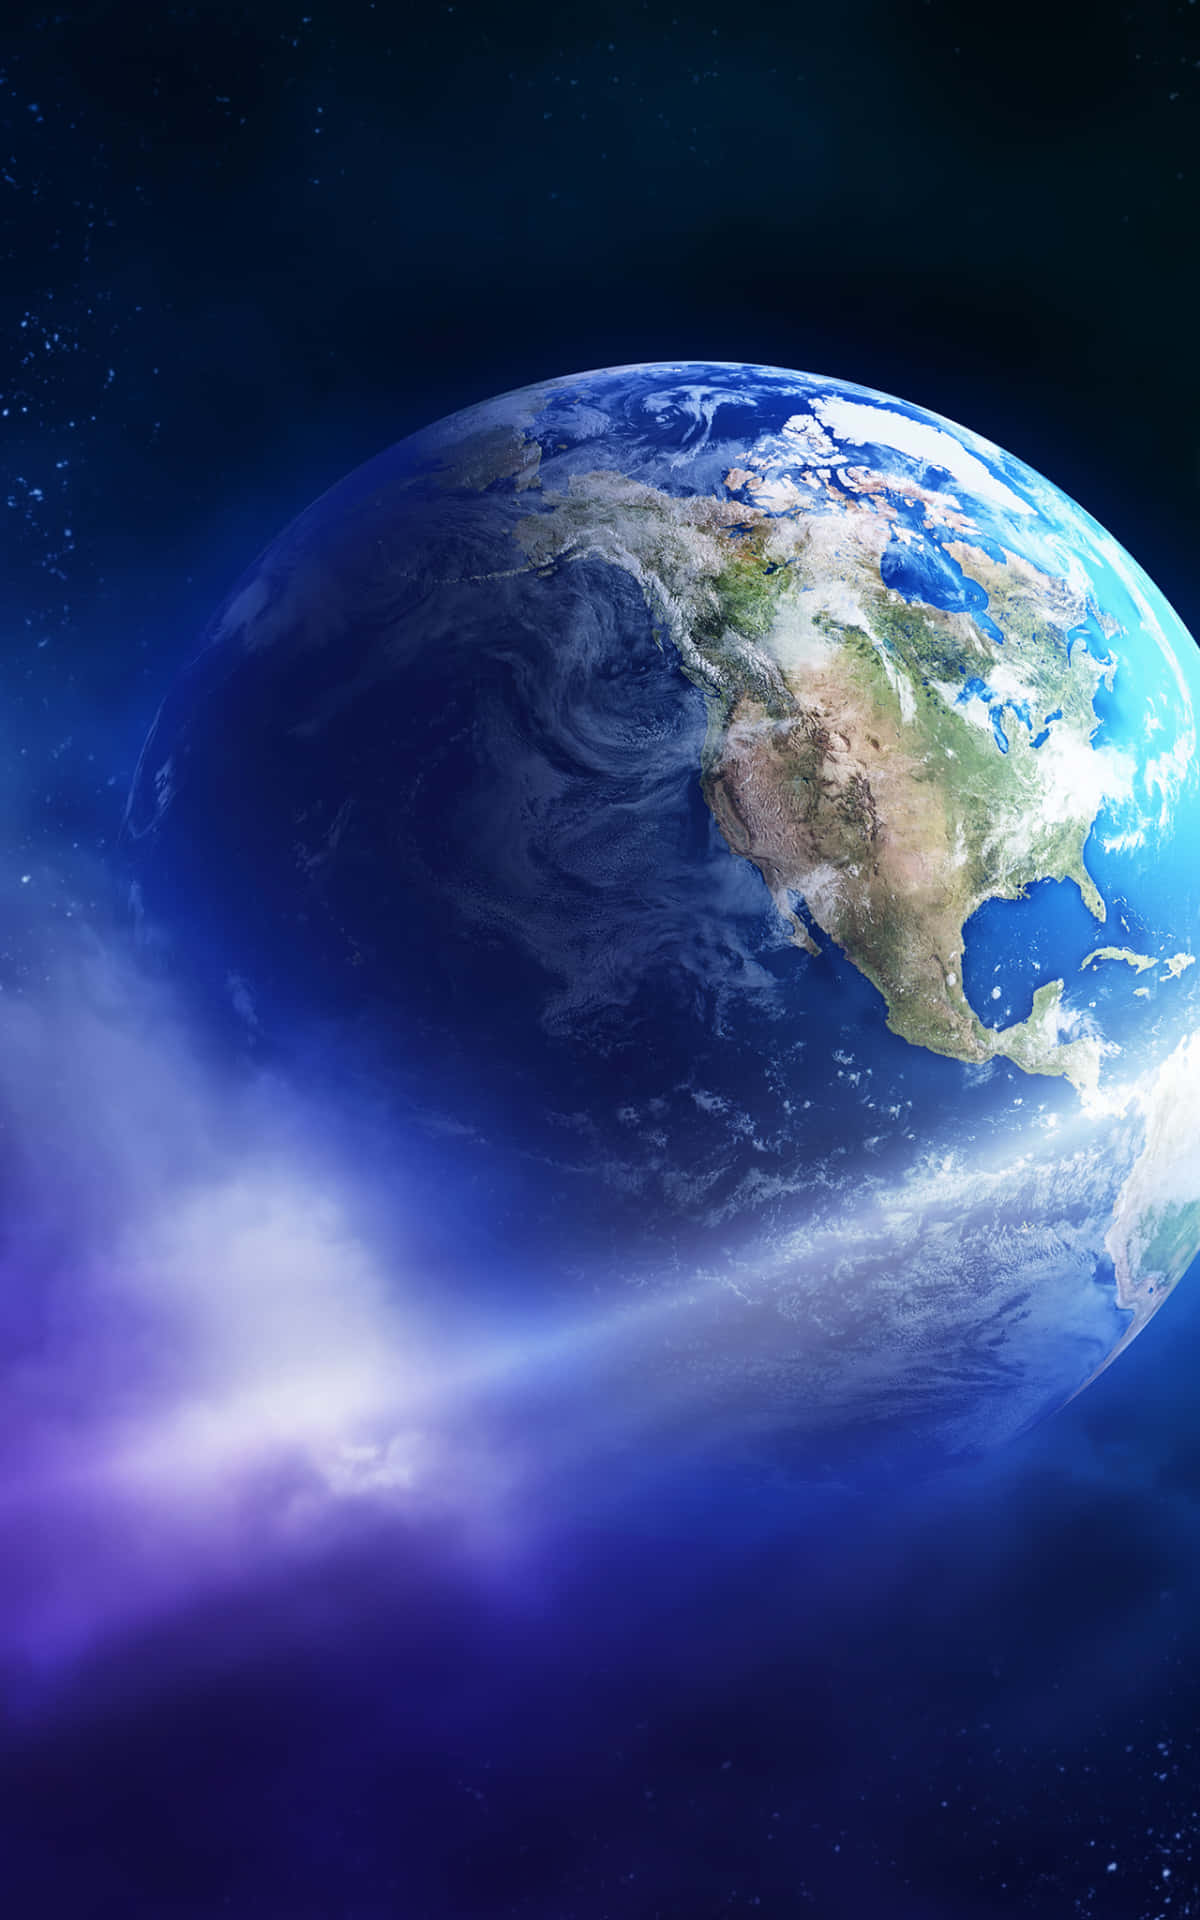 Caption: Majestic 3D Earth in Space Wallpaper